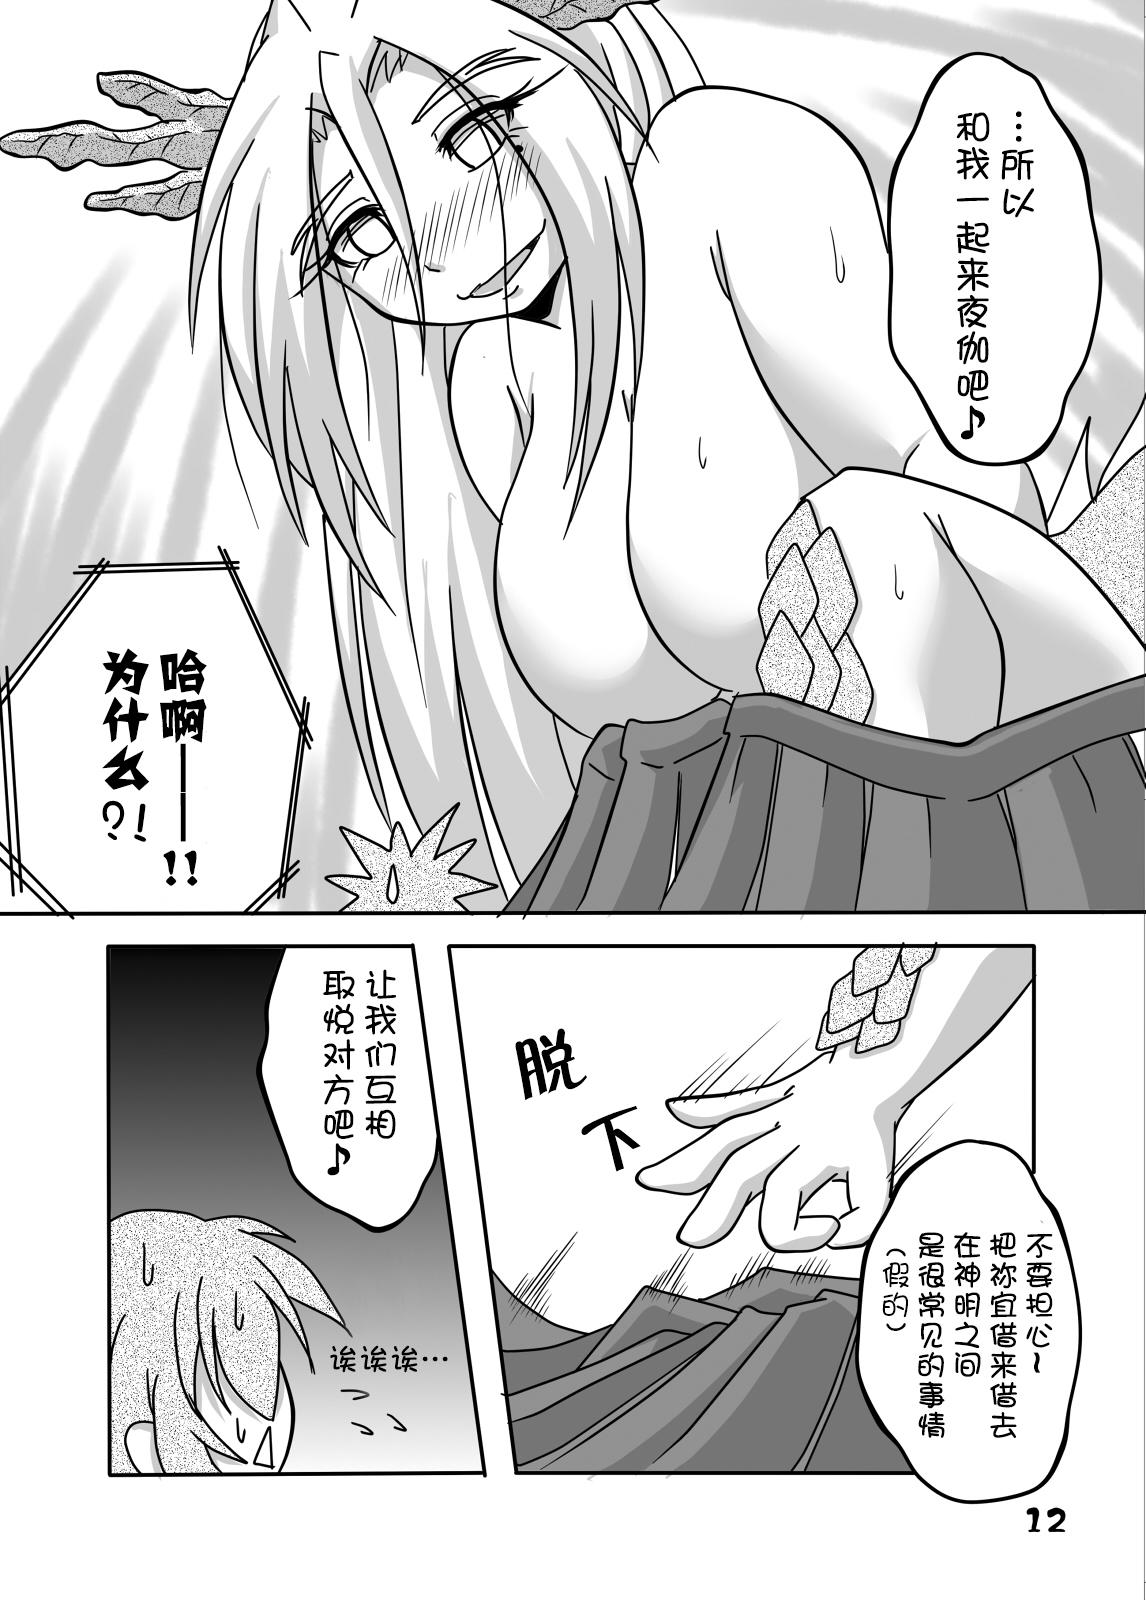 Best Blowjob Ever Ryuujin-sama to Ore | 龙神大人与我 Small Boobs - Page 11